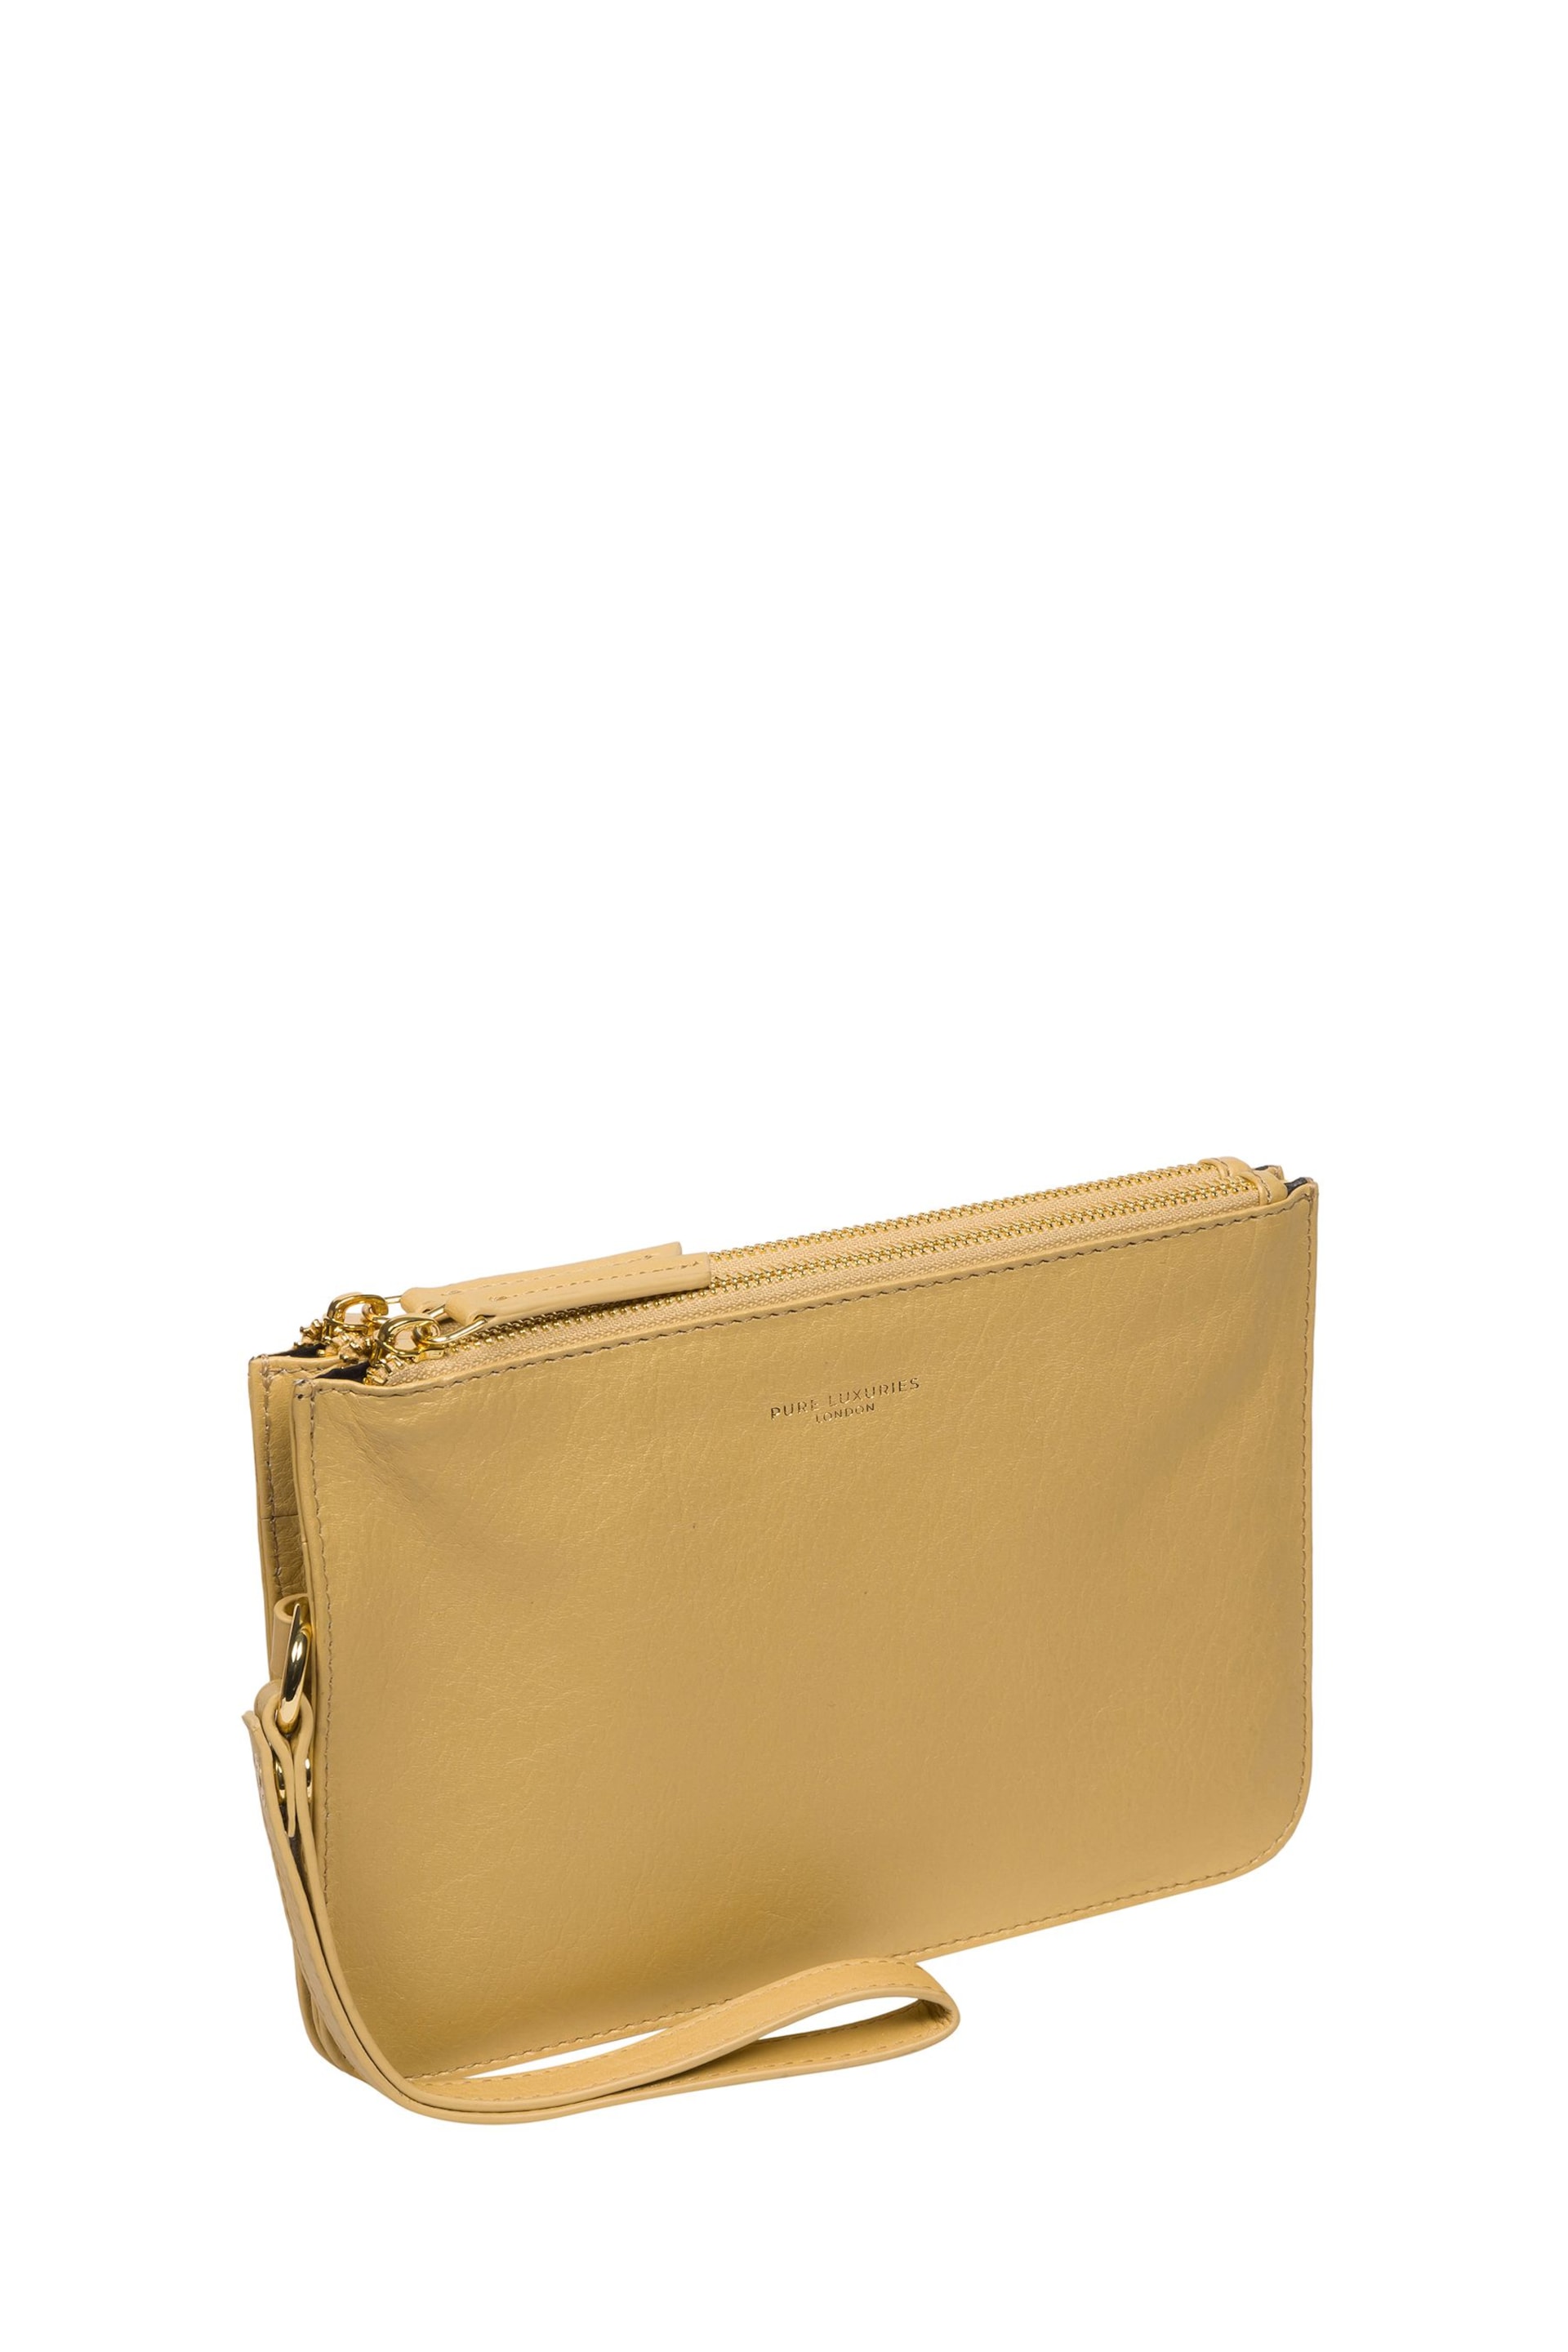 Pure Luxuries London Addison Nappa Leather Clutch Bag - Image 5 of 7